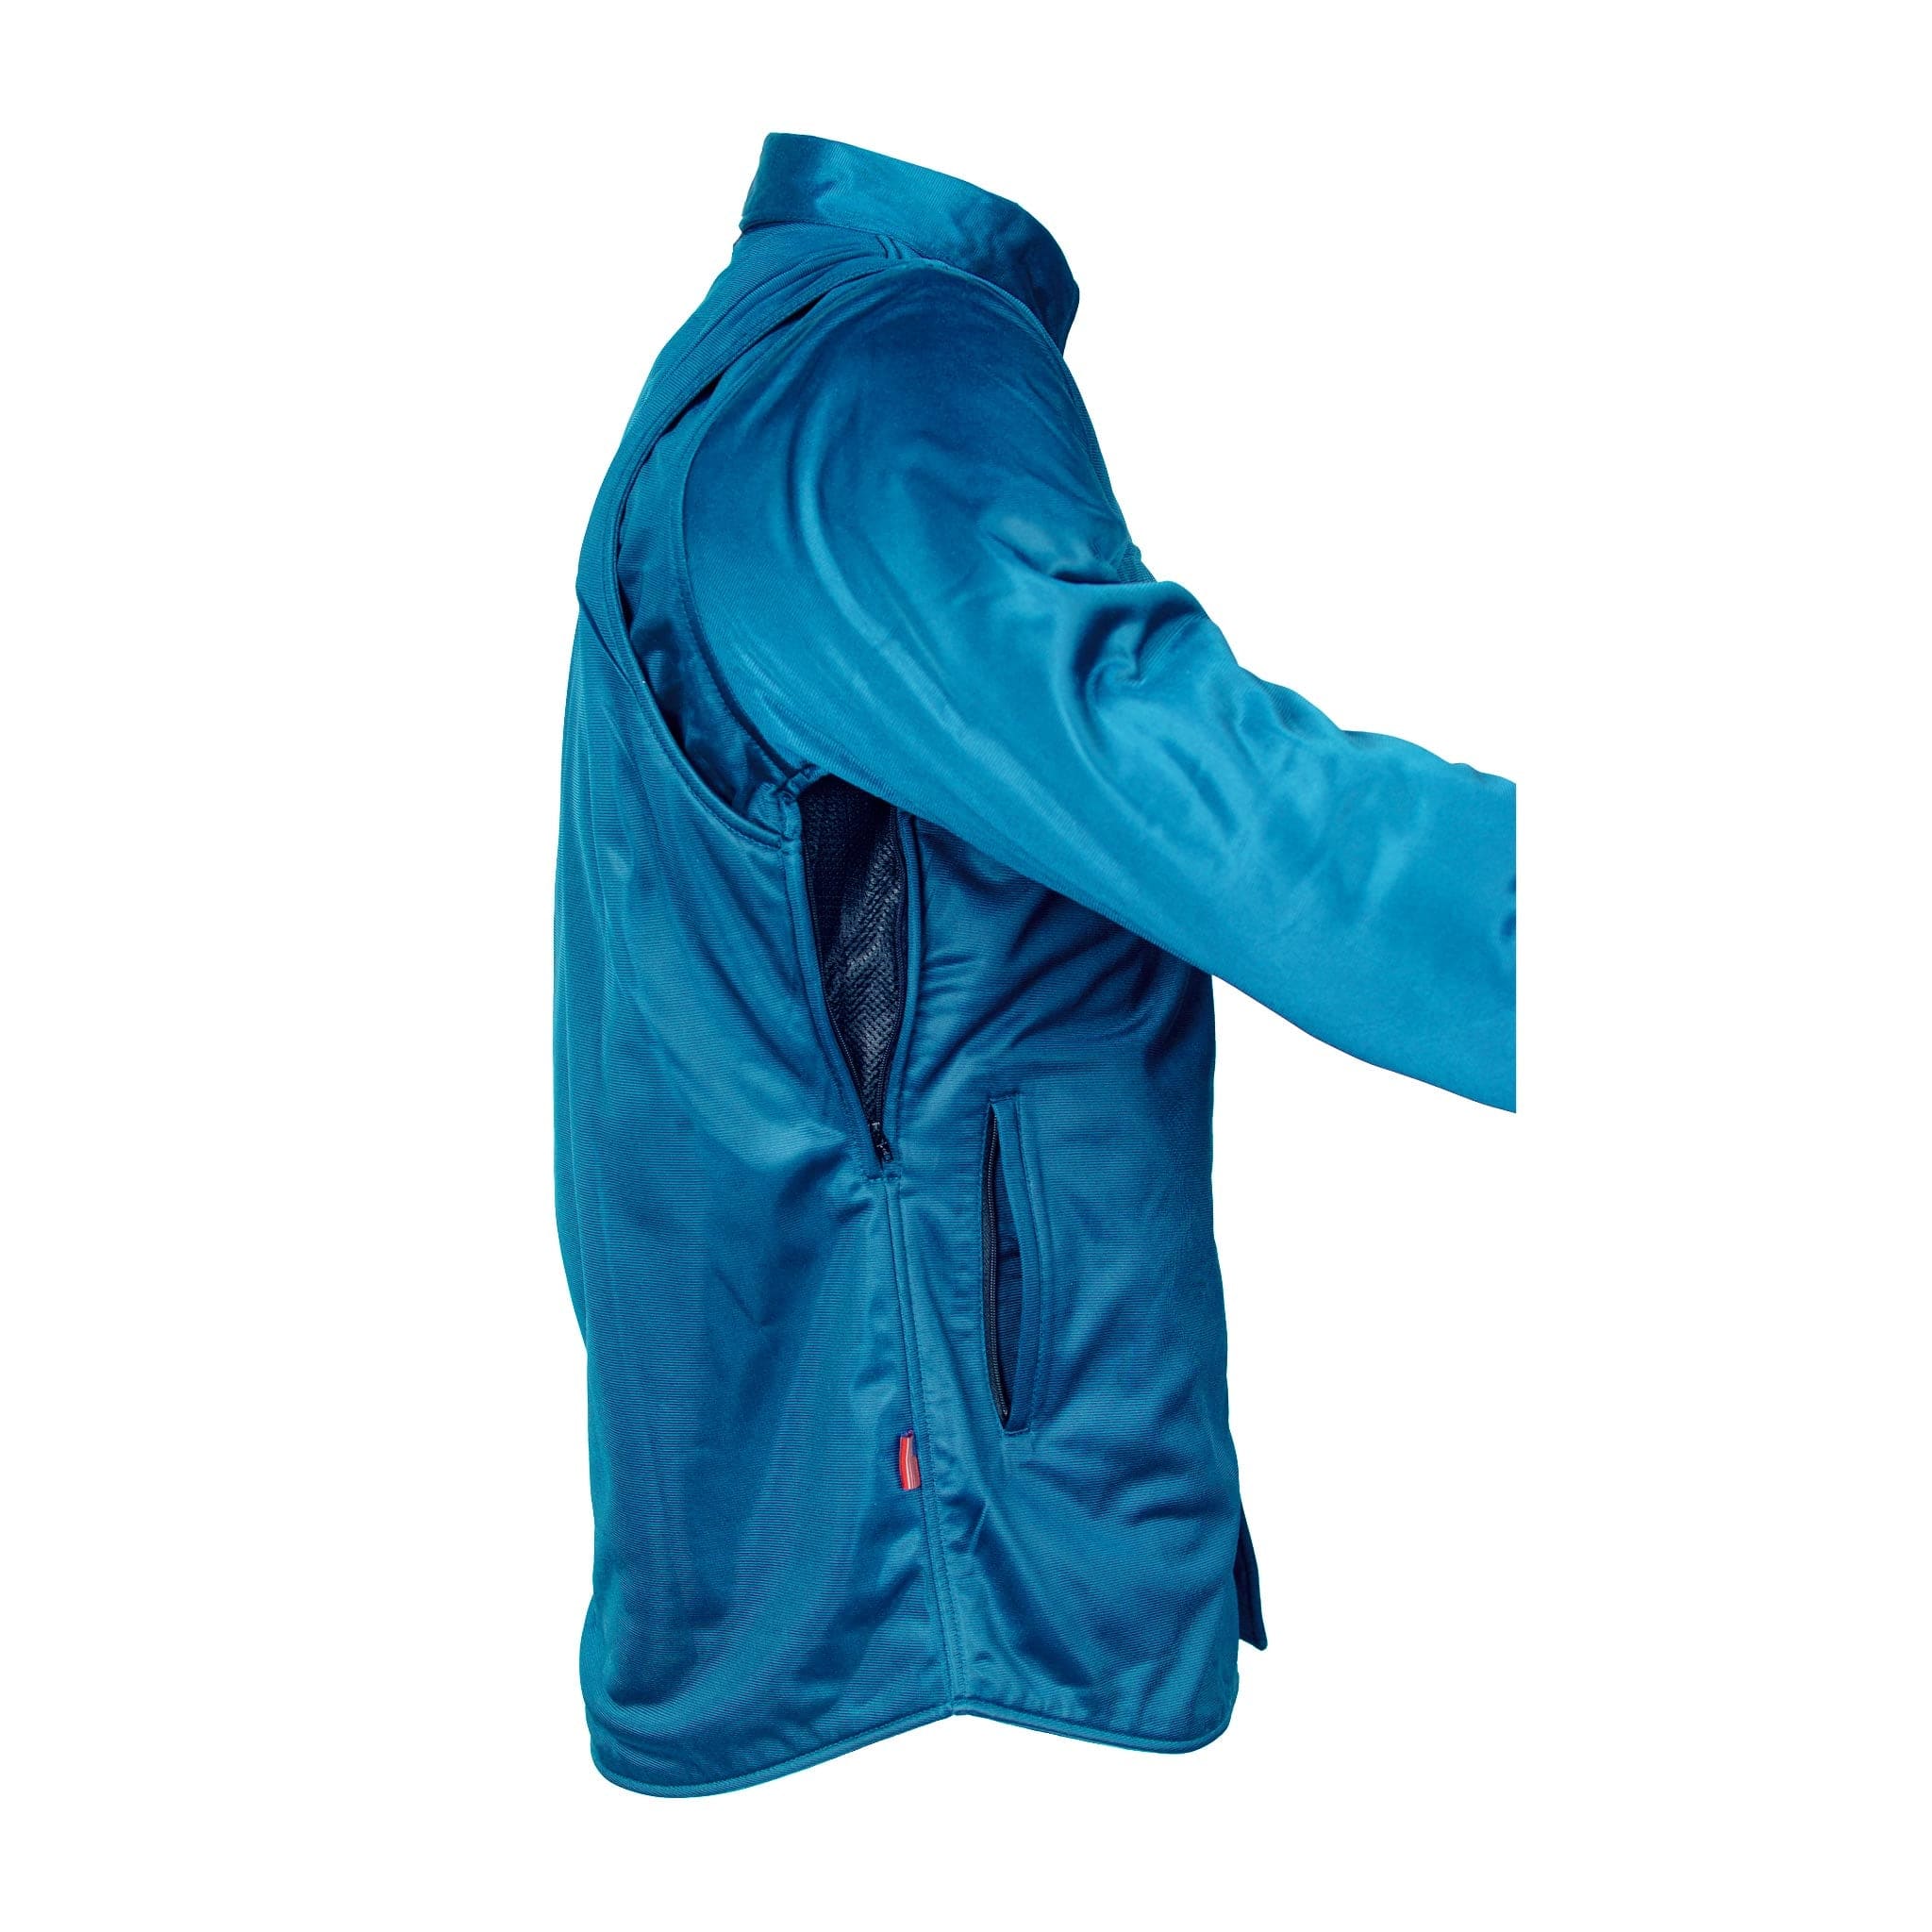 Ultra Protective Shirt - Teal Solid with Pads